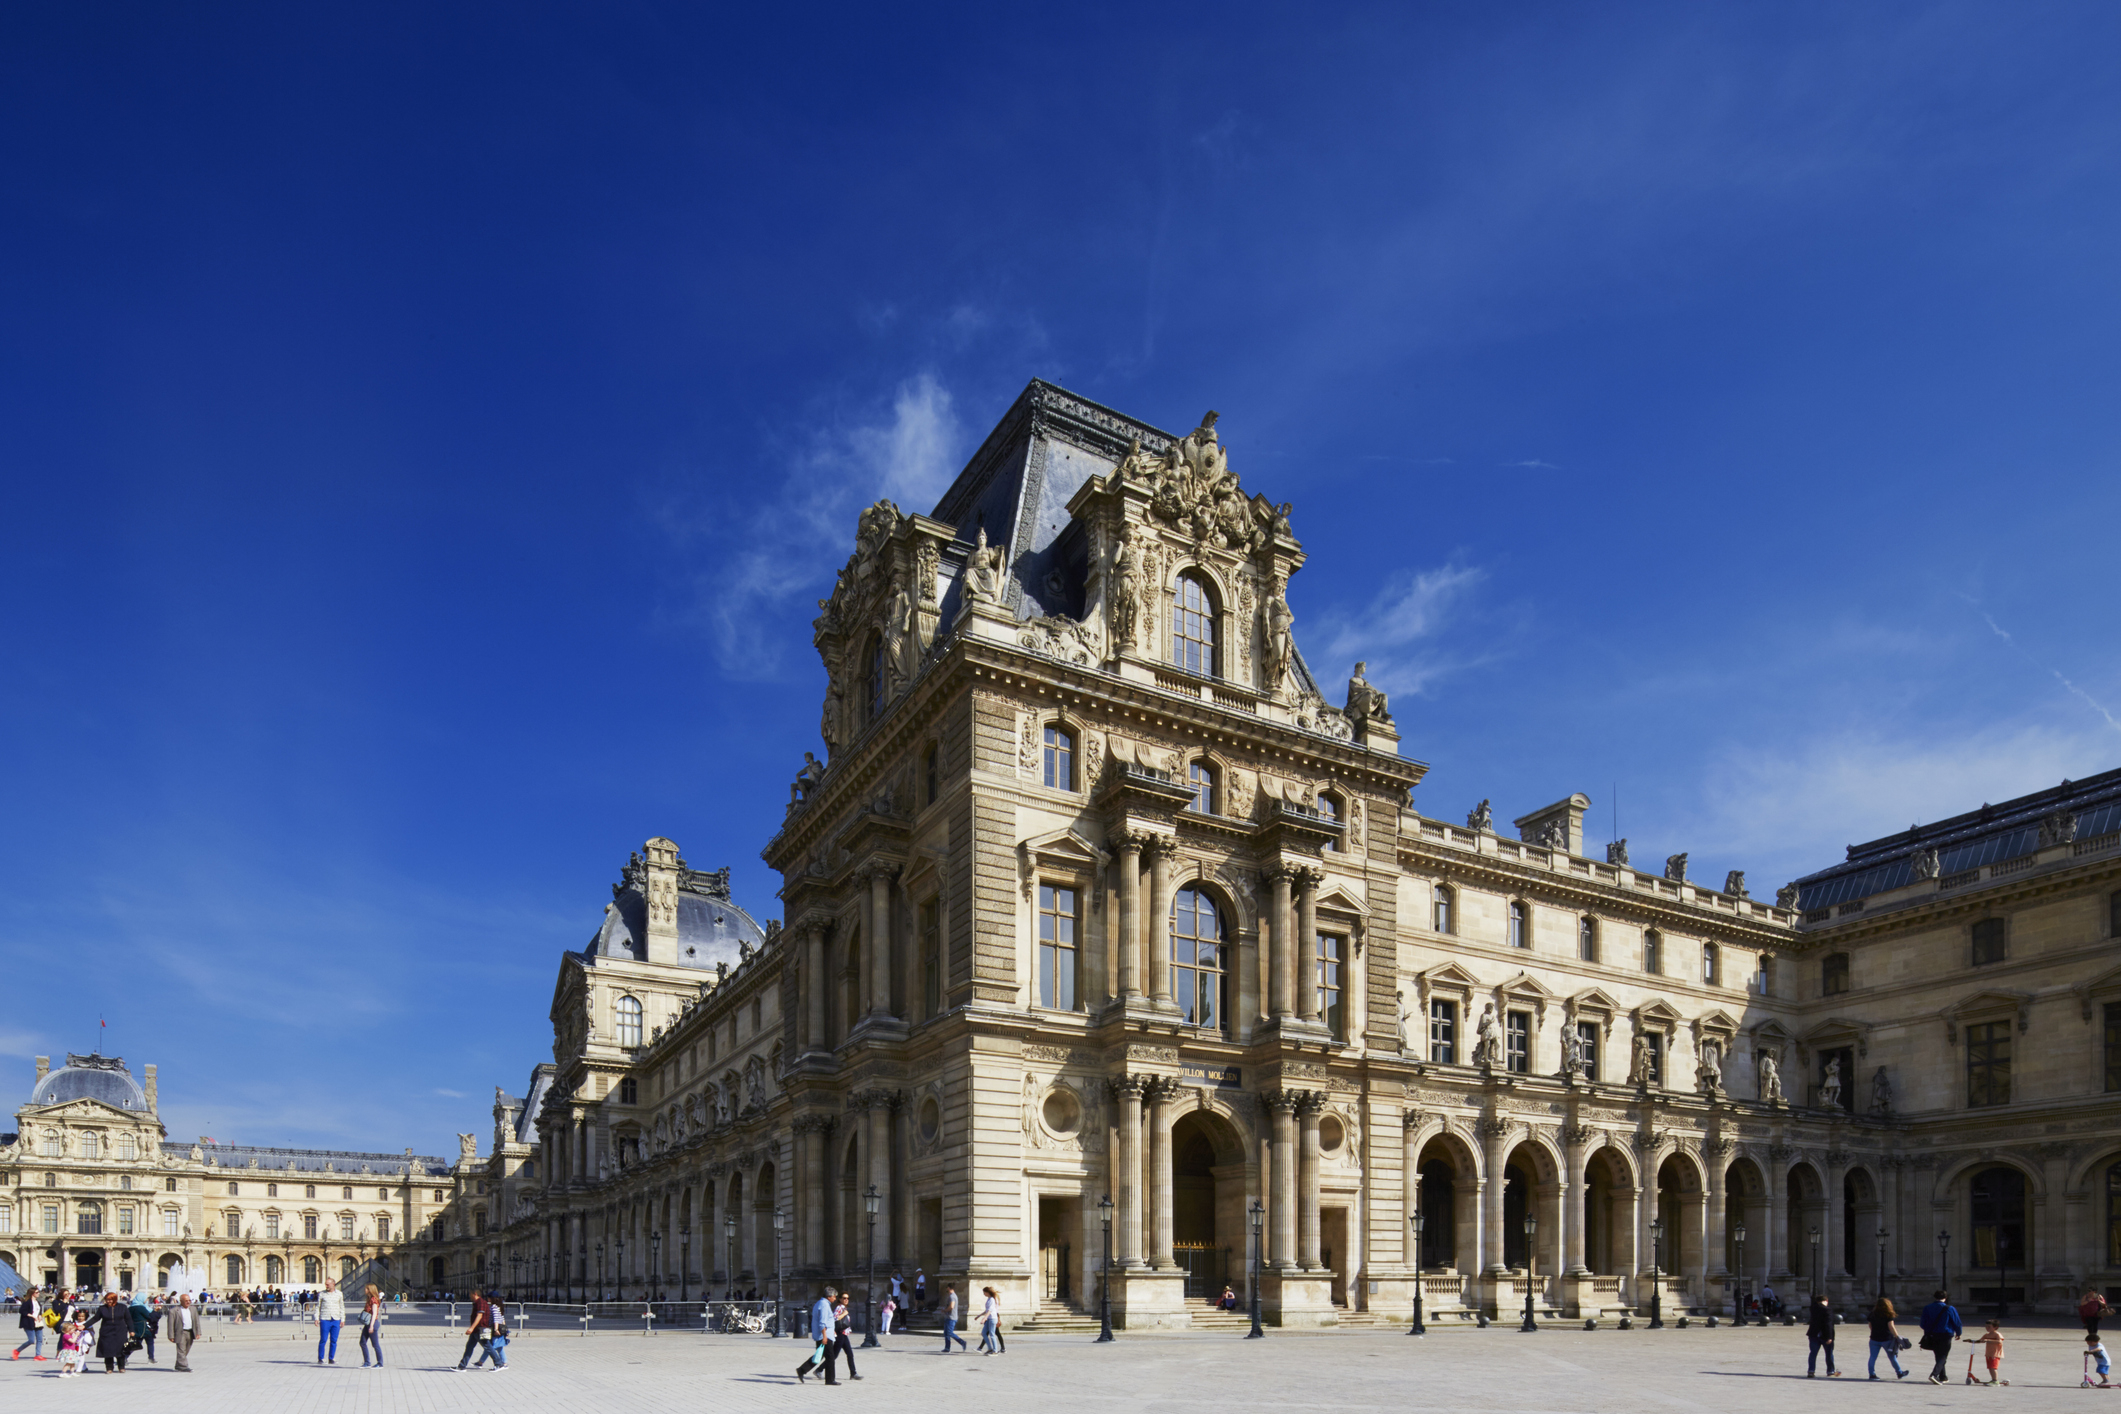 Exterior view of the Louvre Museum in daylight with visitors walking in the courtyard